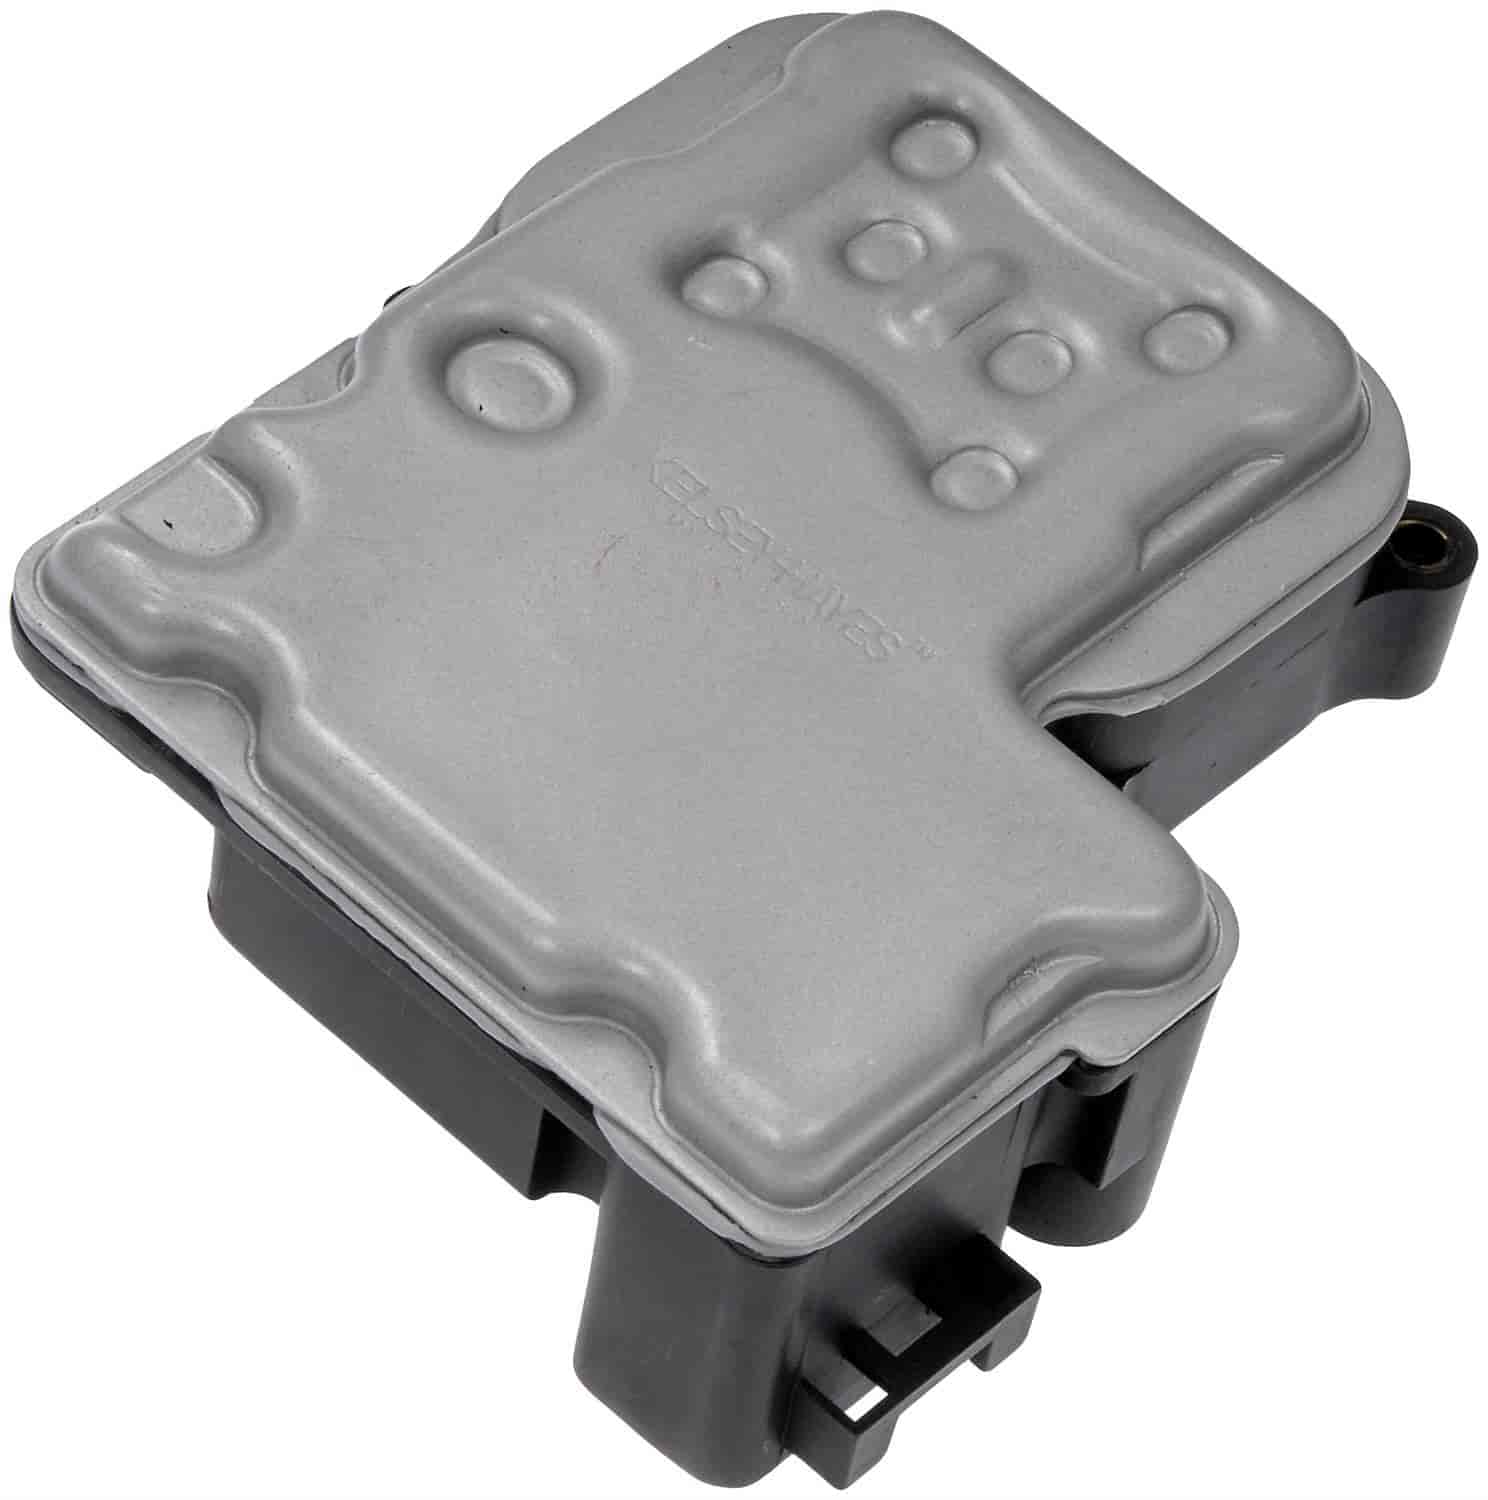 Remanufactured ABS Control Module for 2002-2003 Chevrolet